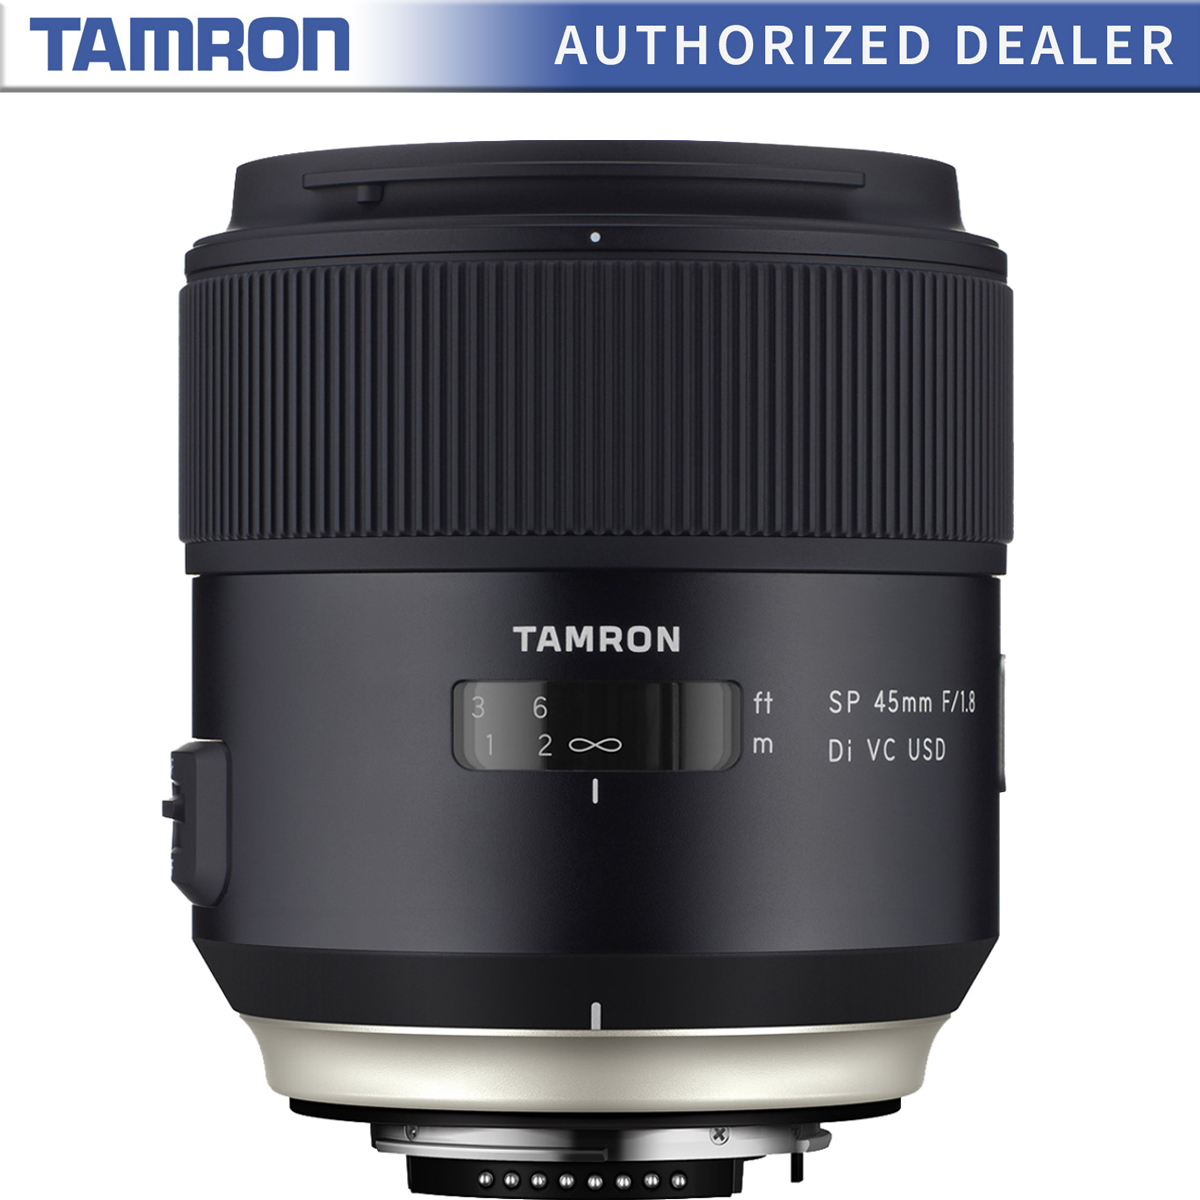 Tamron 45mm f/1.8 SP Di VC USD Lens for Canon EF - image 3 of 3